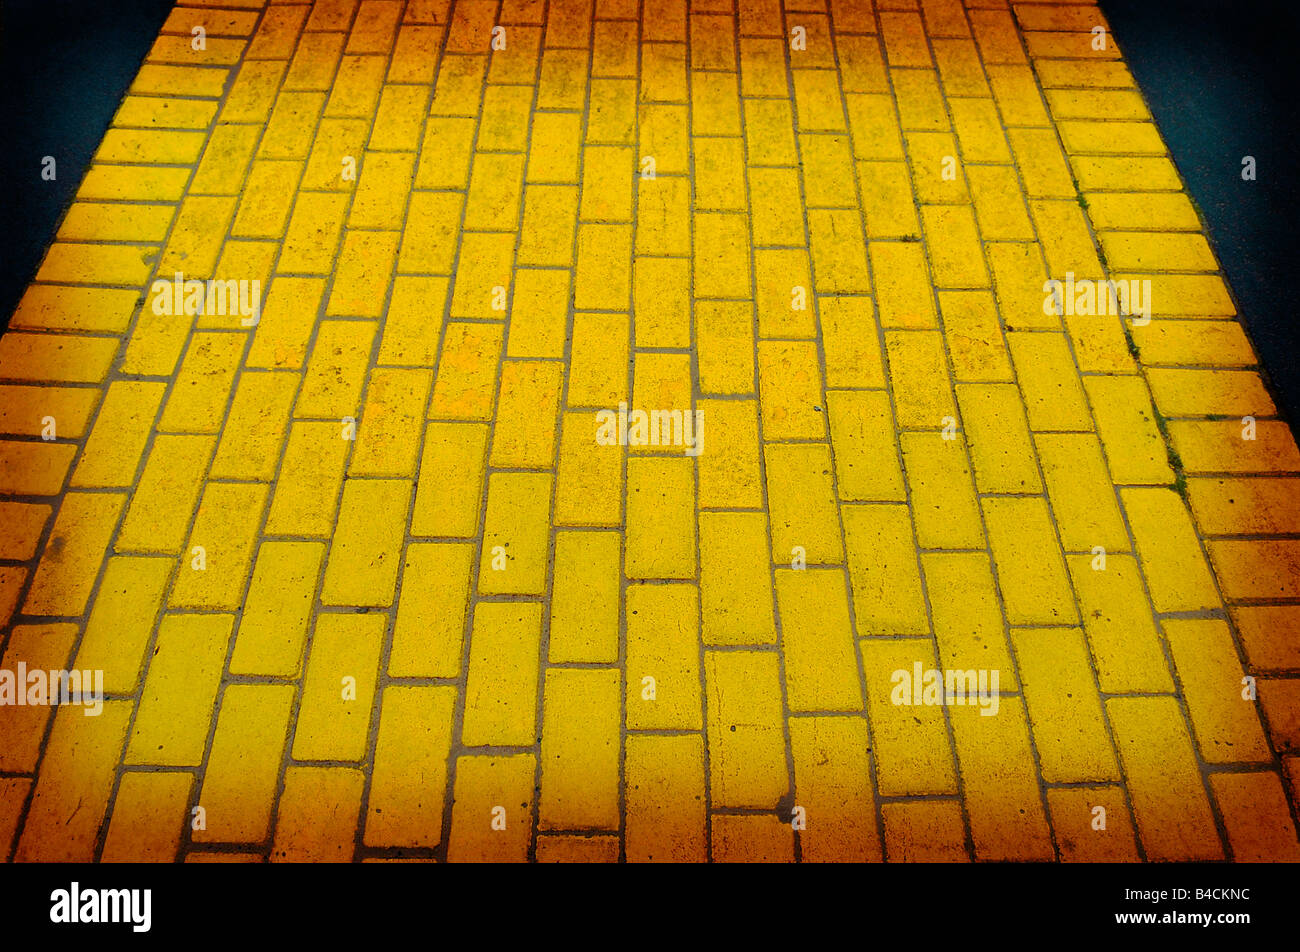 Yellow Brick Road Images – Browse 310 Stock Photos, Vectors, and